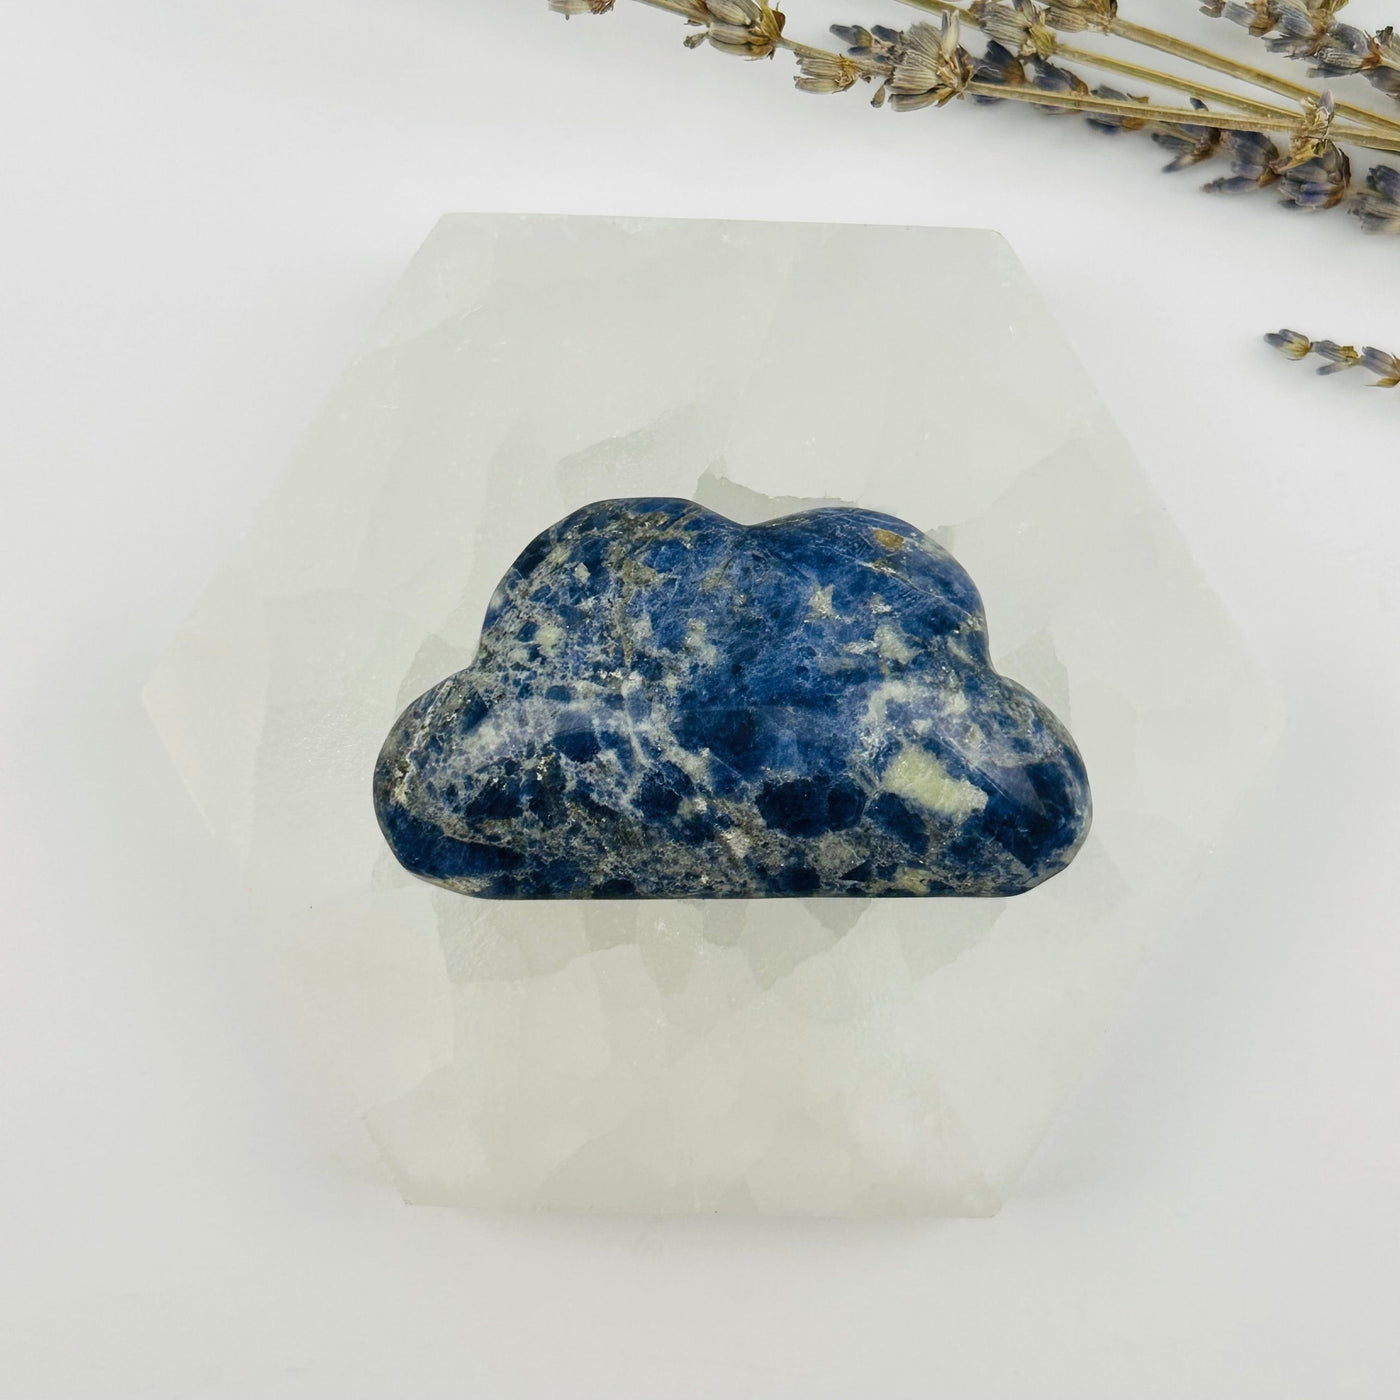 Sodalite Crystal Cloud displayed as home decor 